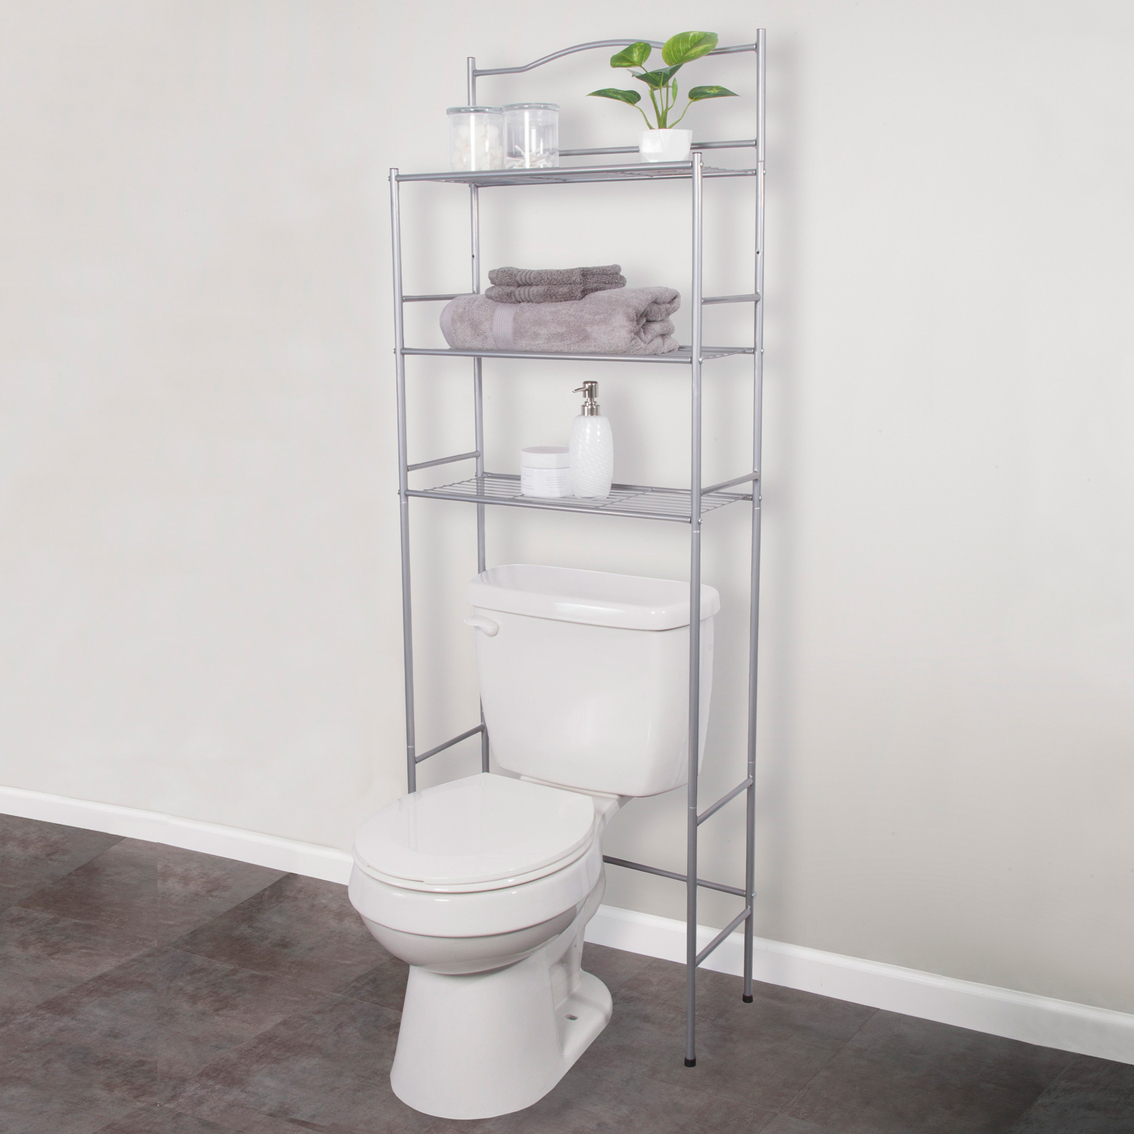 Kenney 3 Tier Bathroom Over Toilet Space Saver Etagere - Image 4 of 4